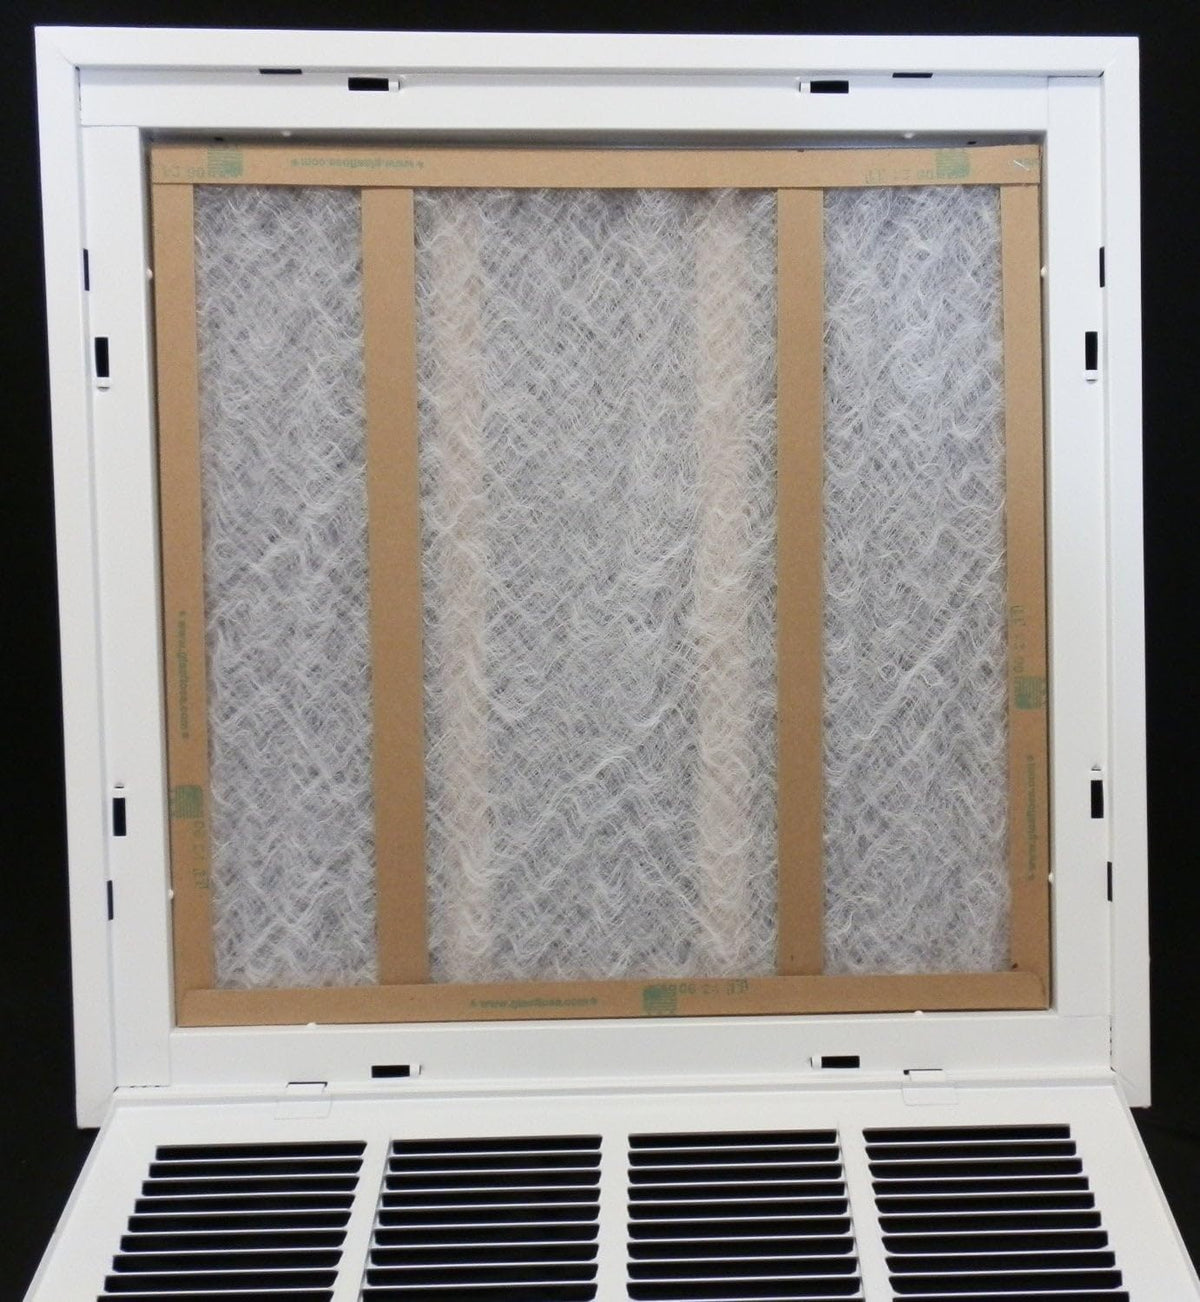 20&quot; X 10&quot; Steel Return Air Filter Grille for 1&quot; Filter - Removable Frame - [Outer Dimensions: 22 5/8&quot; X 12 5/8&quot;]